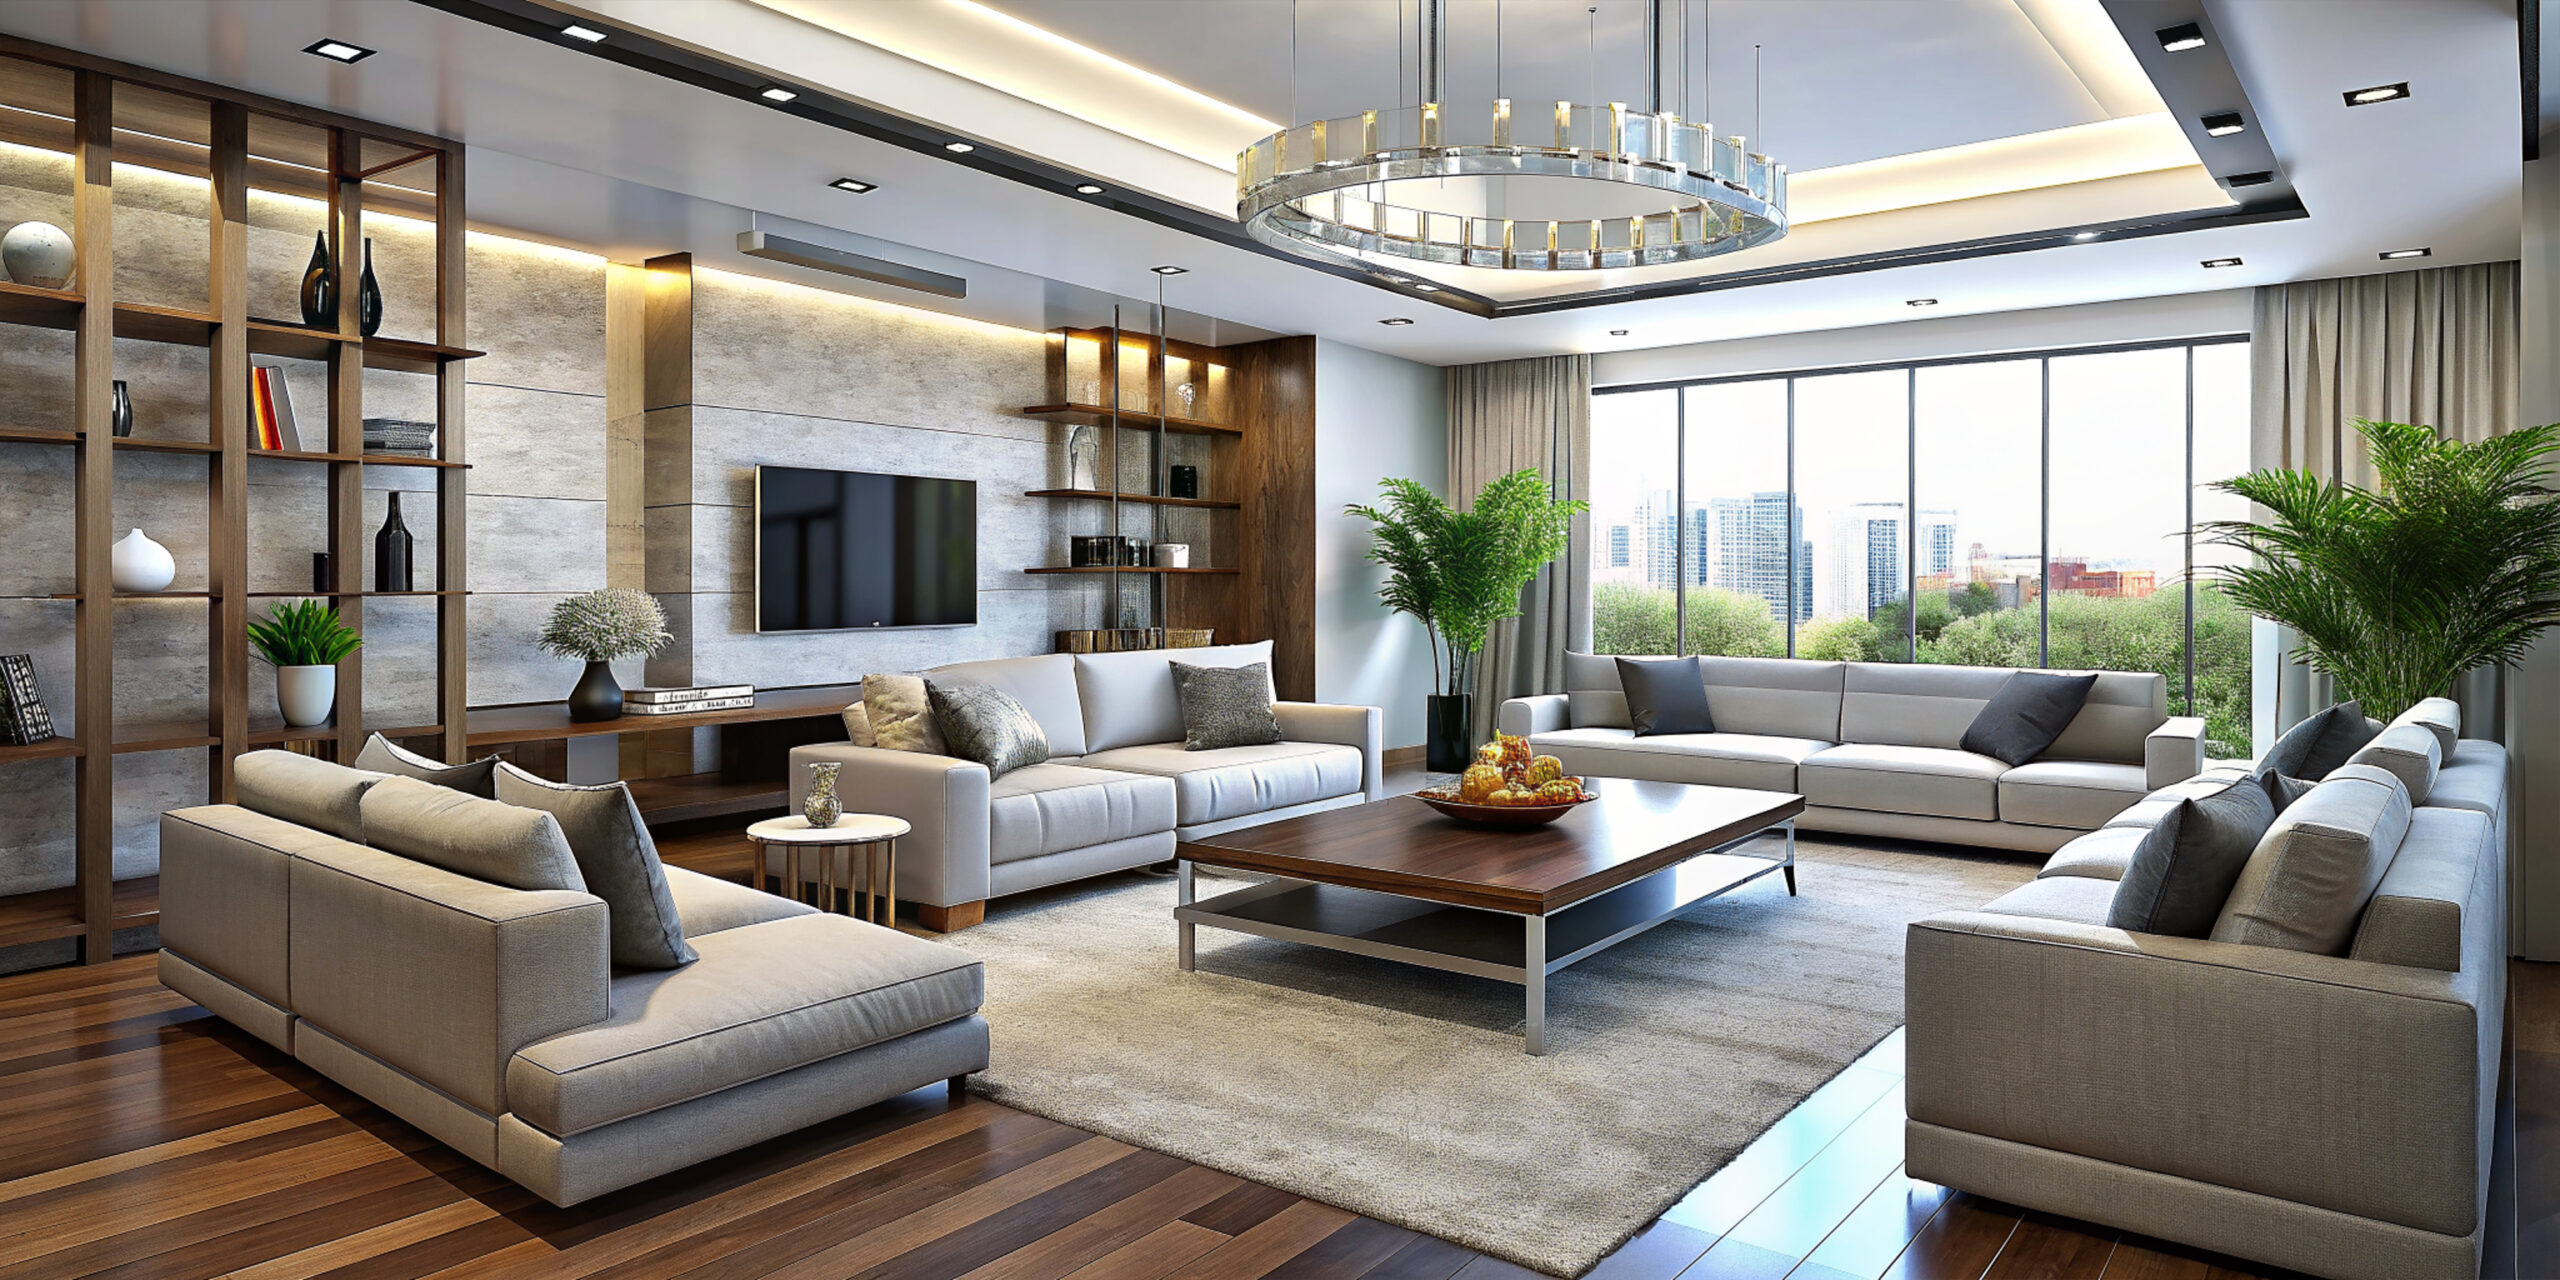 Top 10 Residential Interior Design Companies in India You Should Know About